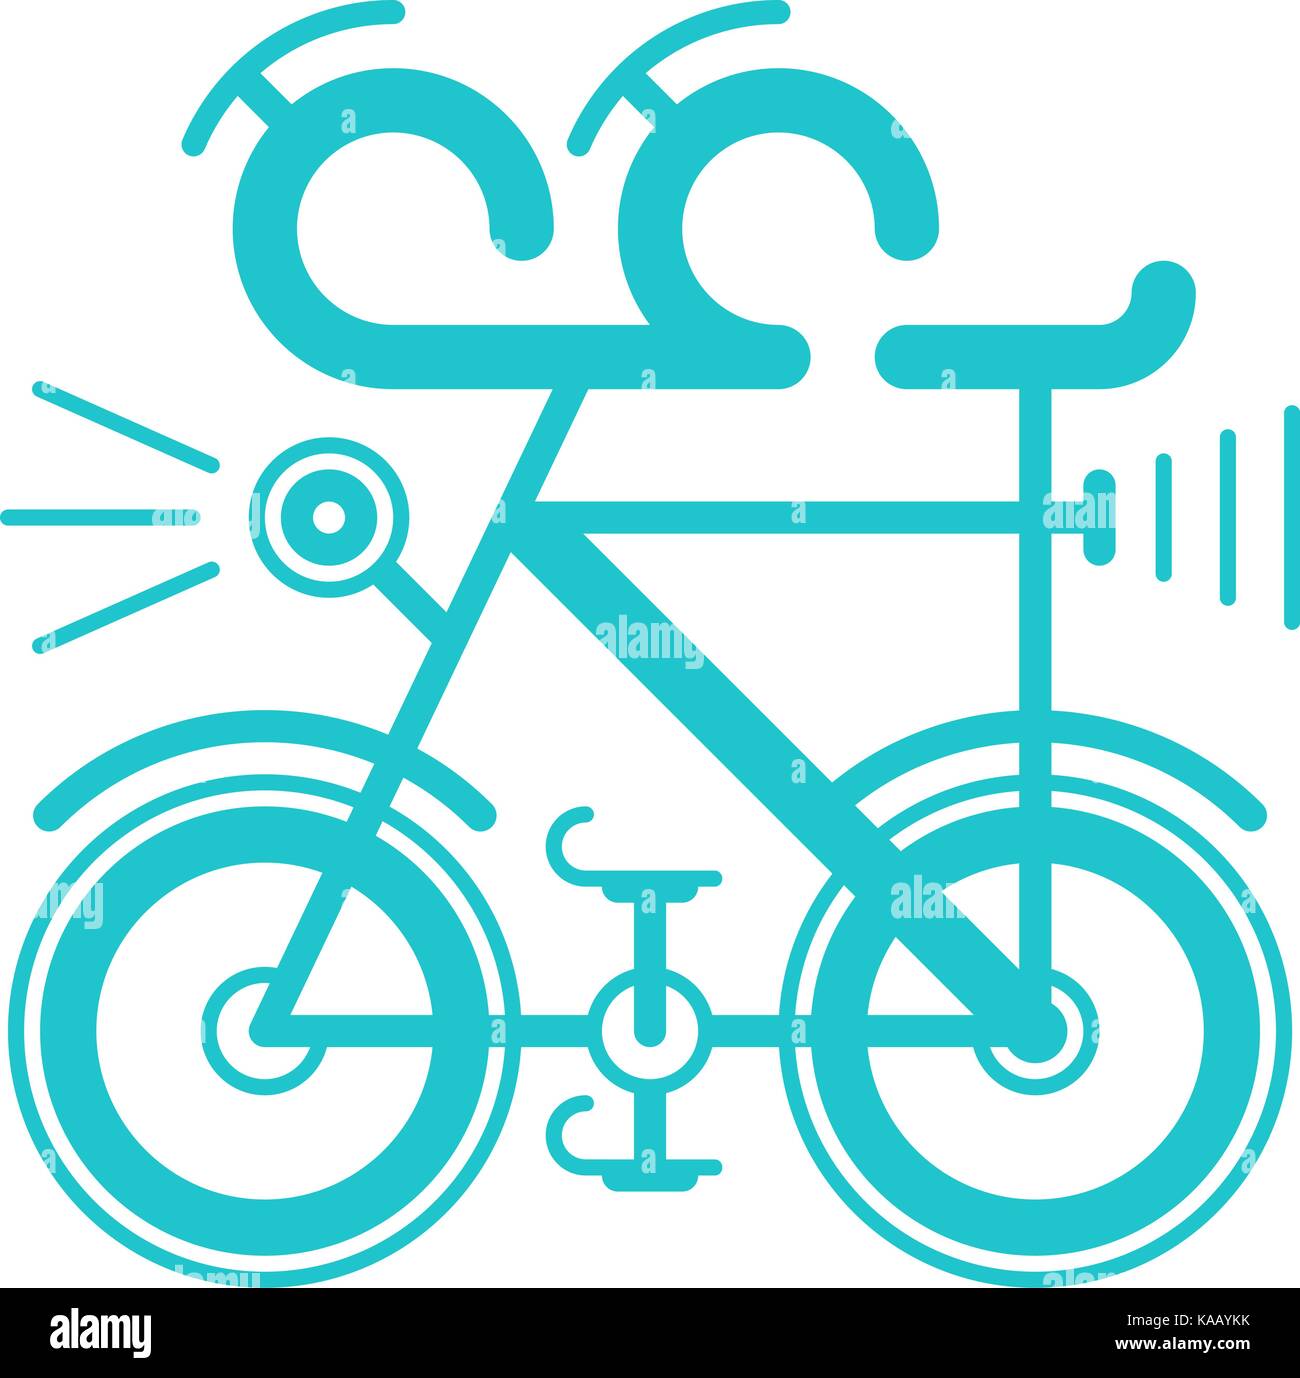 Use it in all your designs. One color bicycle bike icon in flat style. Quick and easy recolorable shape. Vector illustration a graphic element Stock Vector